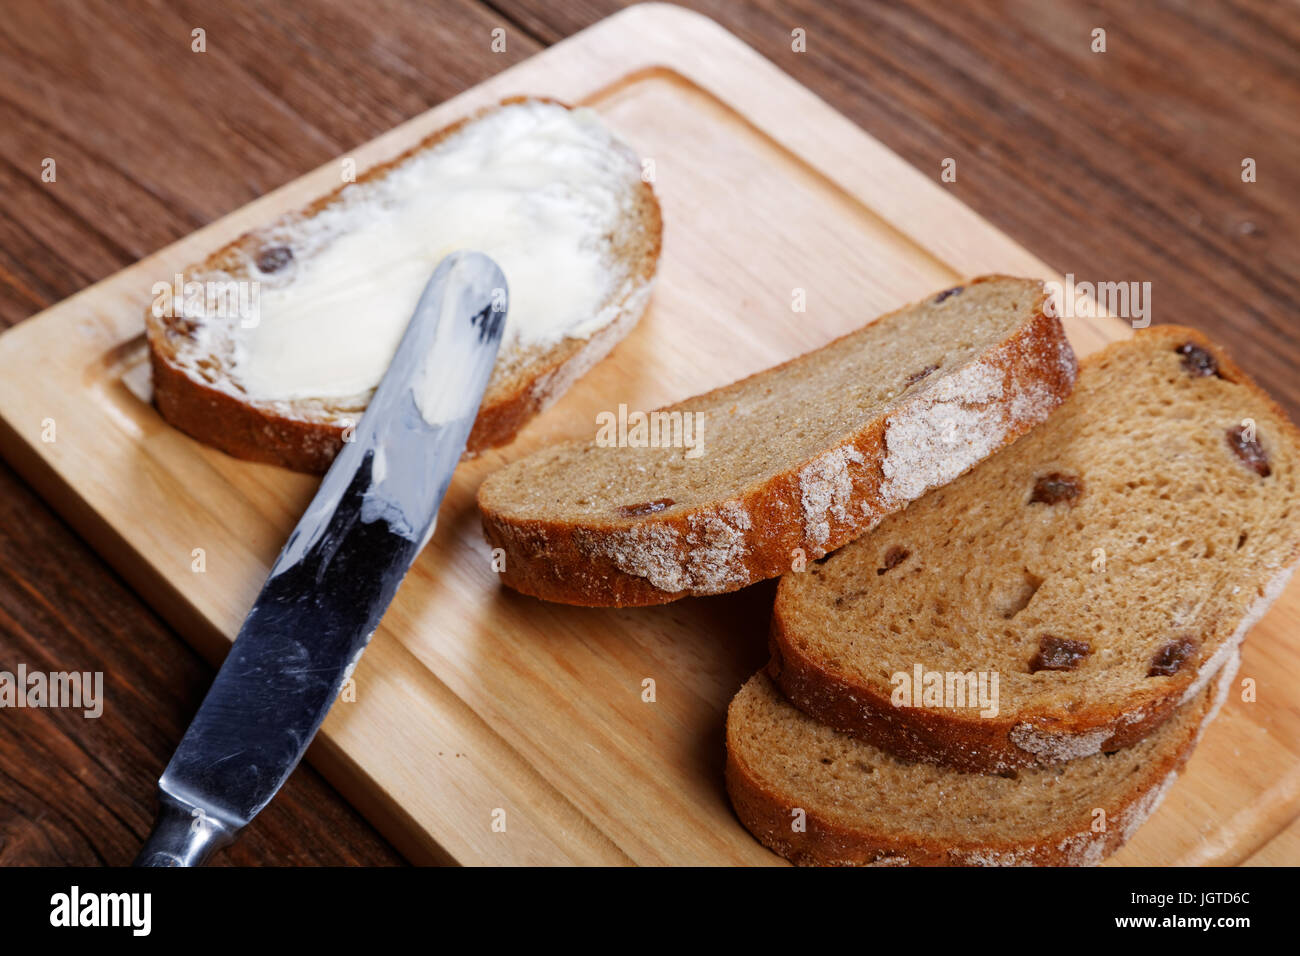 Sliced bread smeared with butter close-up Stock Photo